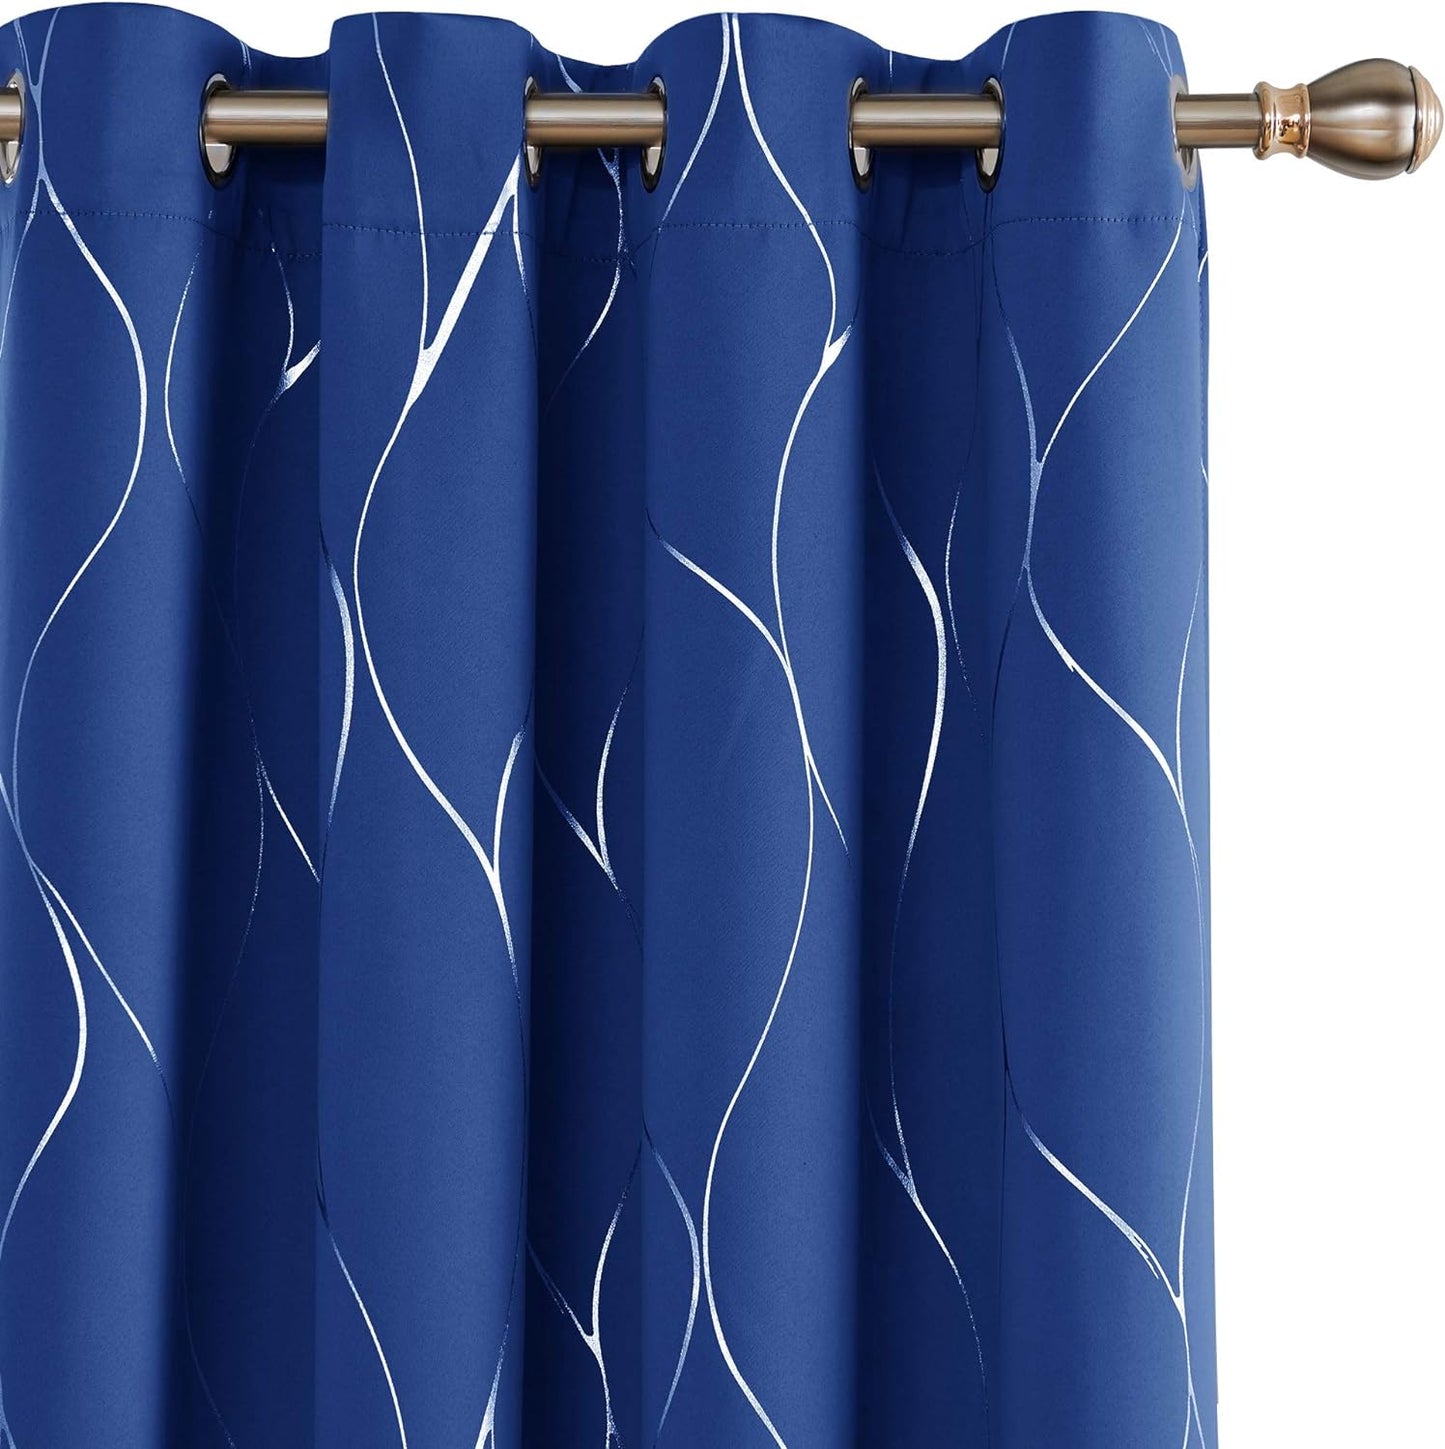 Deconovo Blackout Curtains with Foil Wave Pattern, Grommet Curtain Room Darkening Window Panels, Thermal Insulated Curtain Drapes for Nursery Room (42W X 54L Inch, 2 Panels, Turquoise)  DECONOVO Royal Blue W52 X L108 